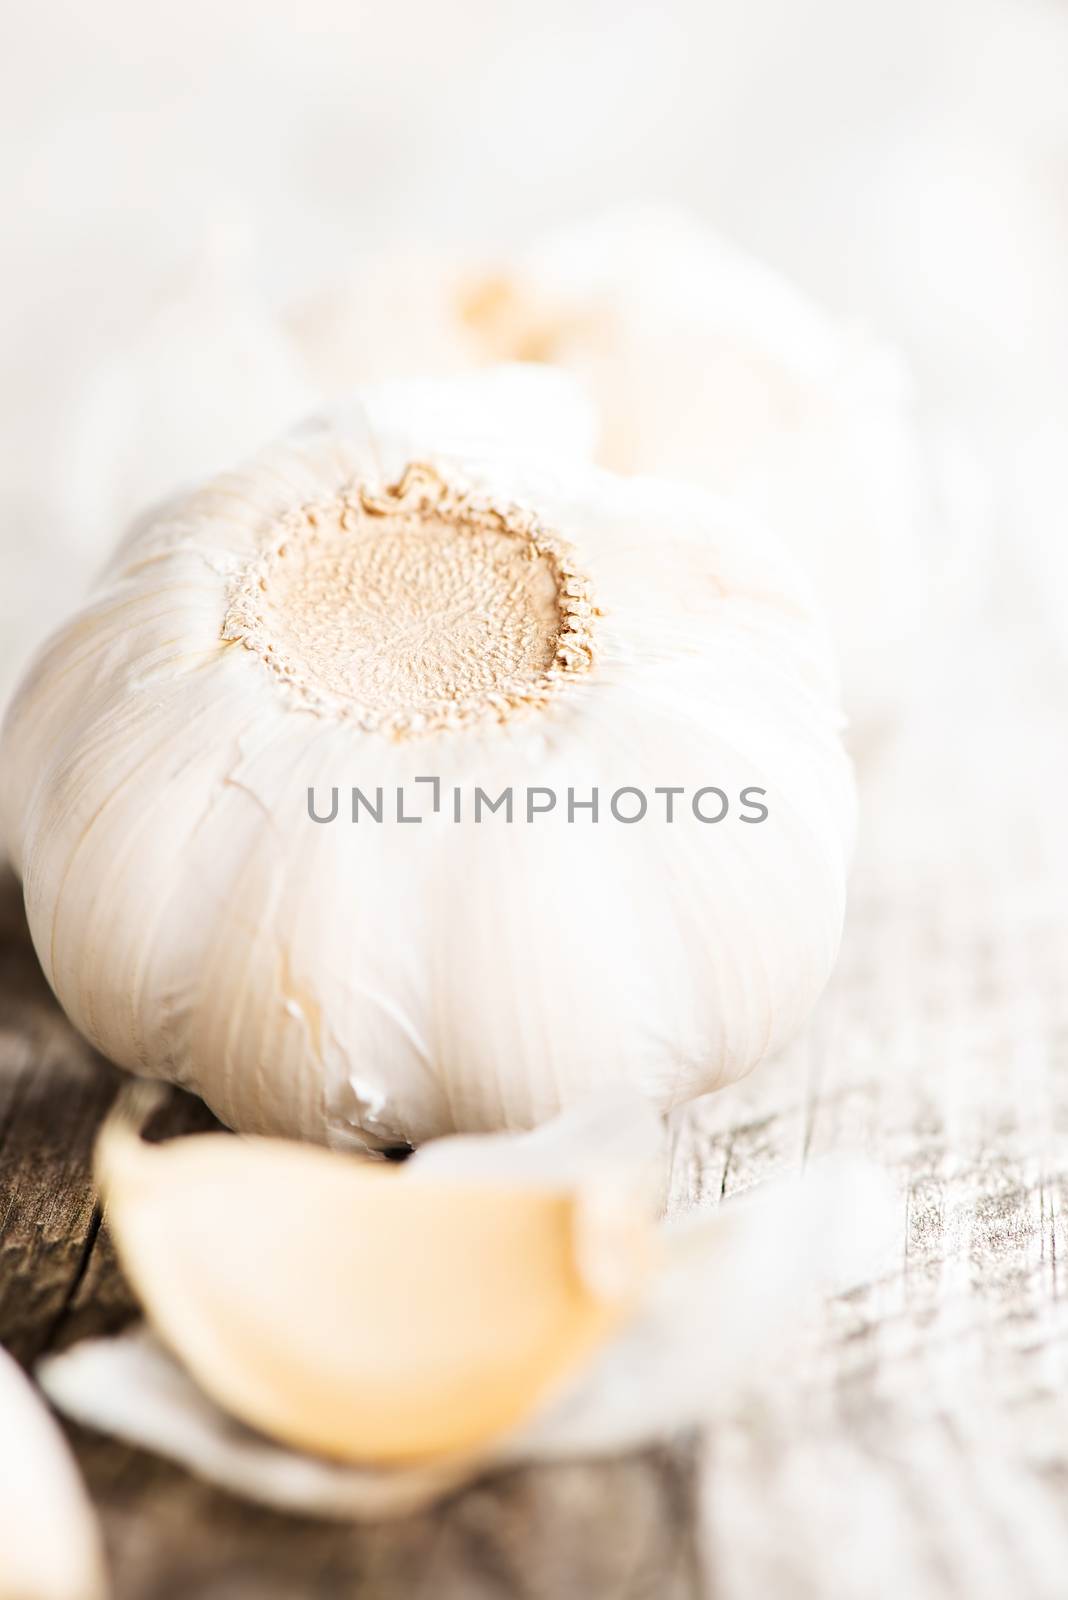 Garlic on wooden table up side down by Nanisimova